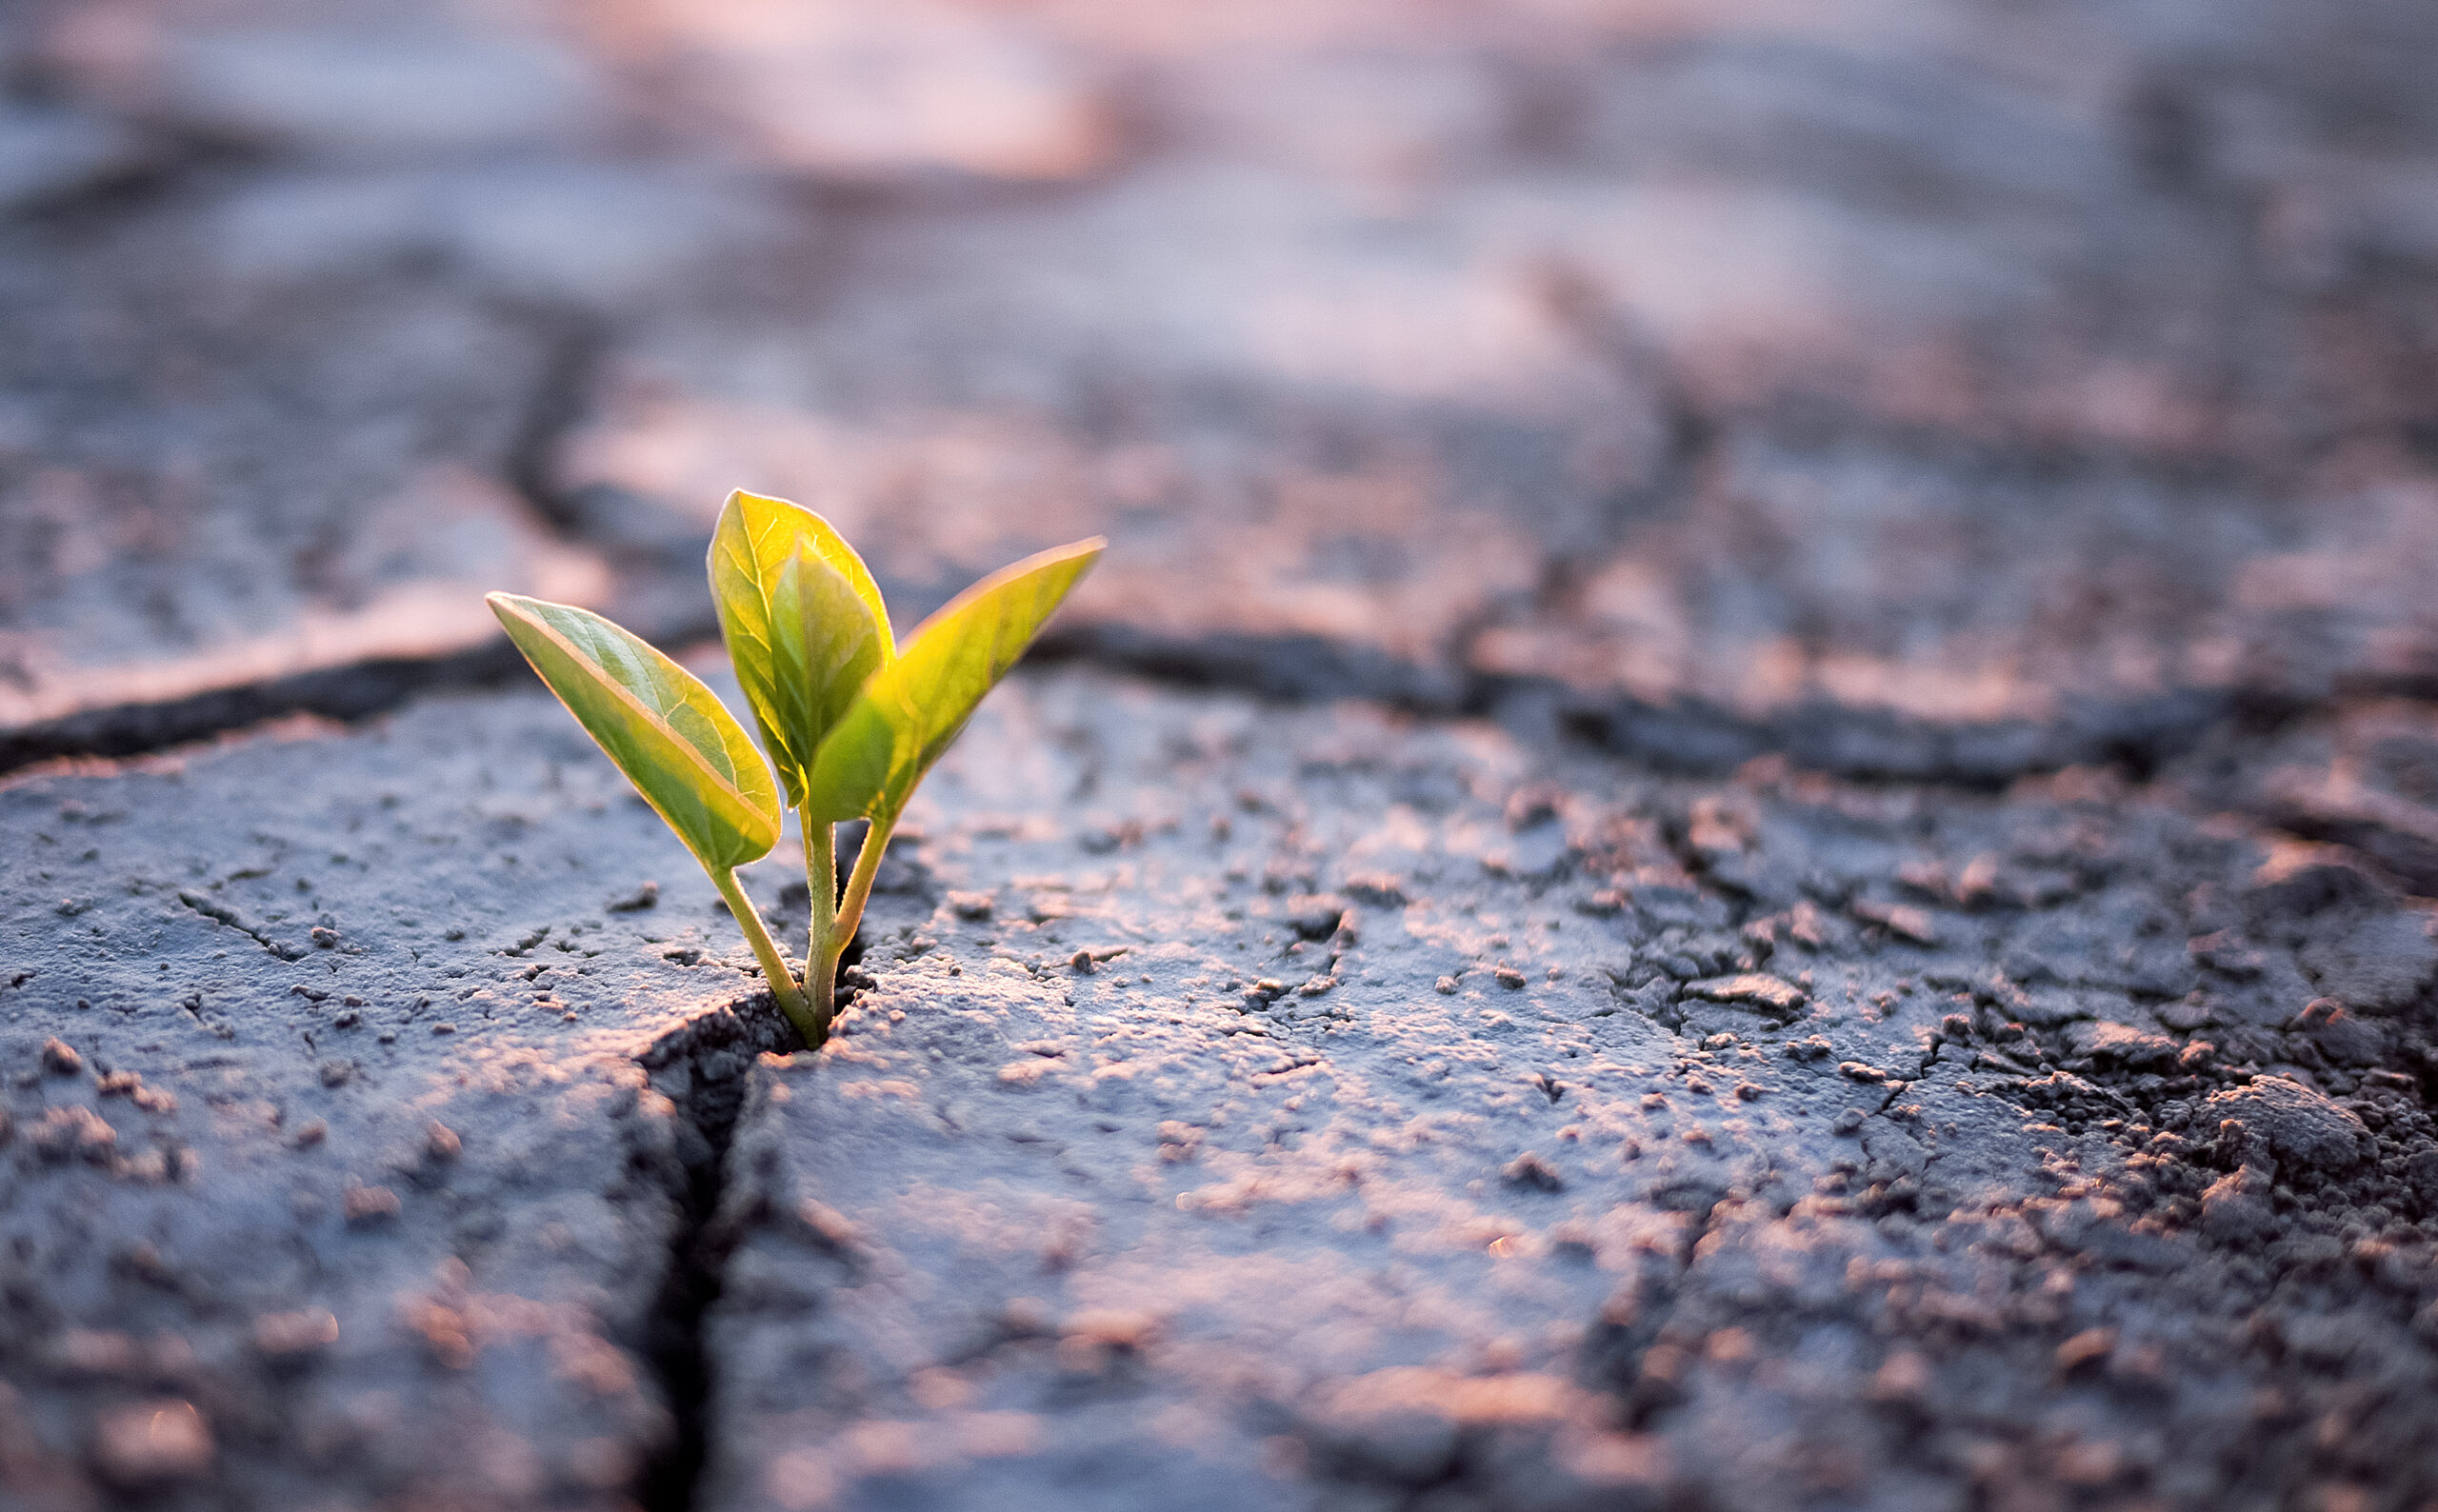 A small plant sprout pokes through cracked, dry earth.